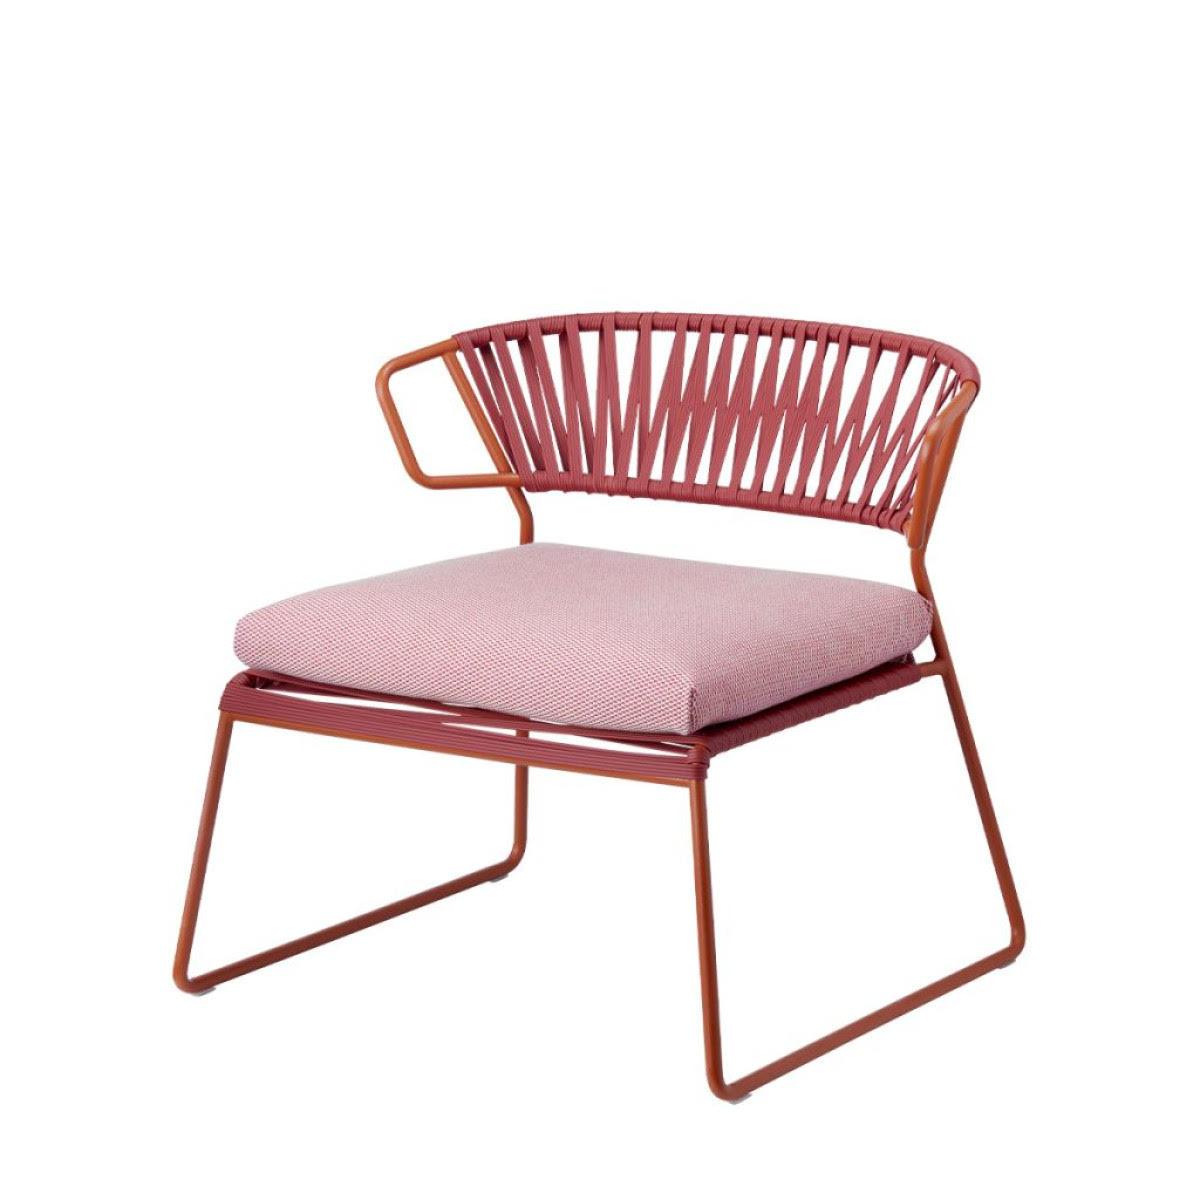 French Modern Pink Terracotta Armchair Outdoor or Indoor in Metal and Ropes, 21 century For Sale